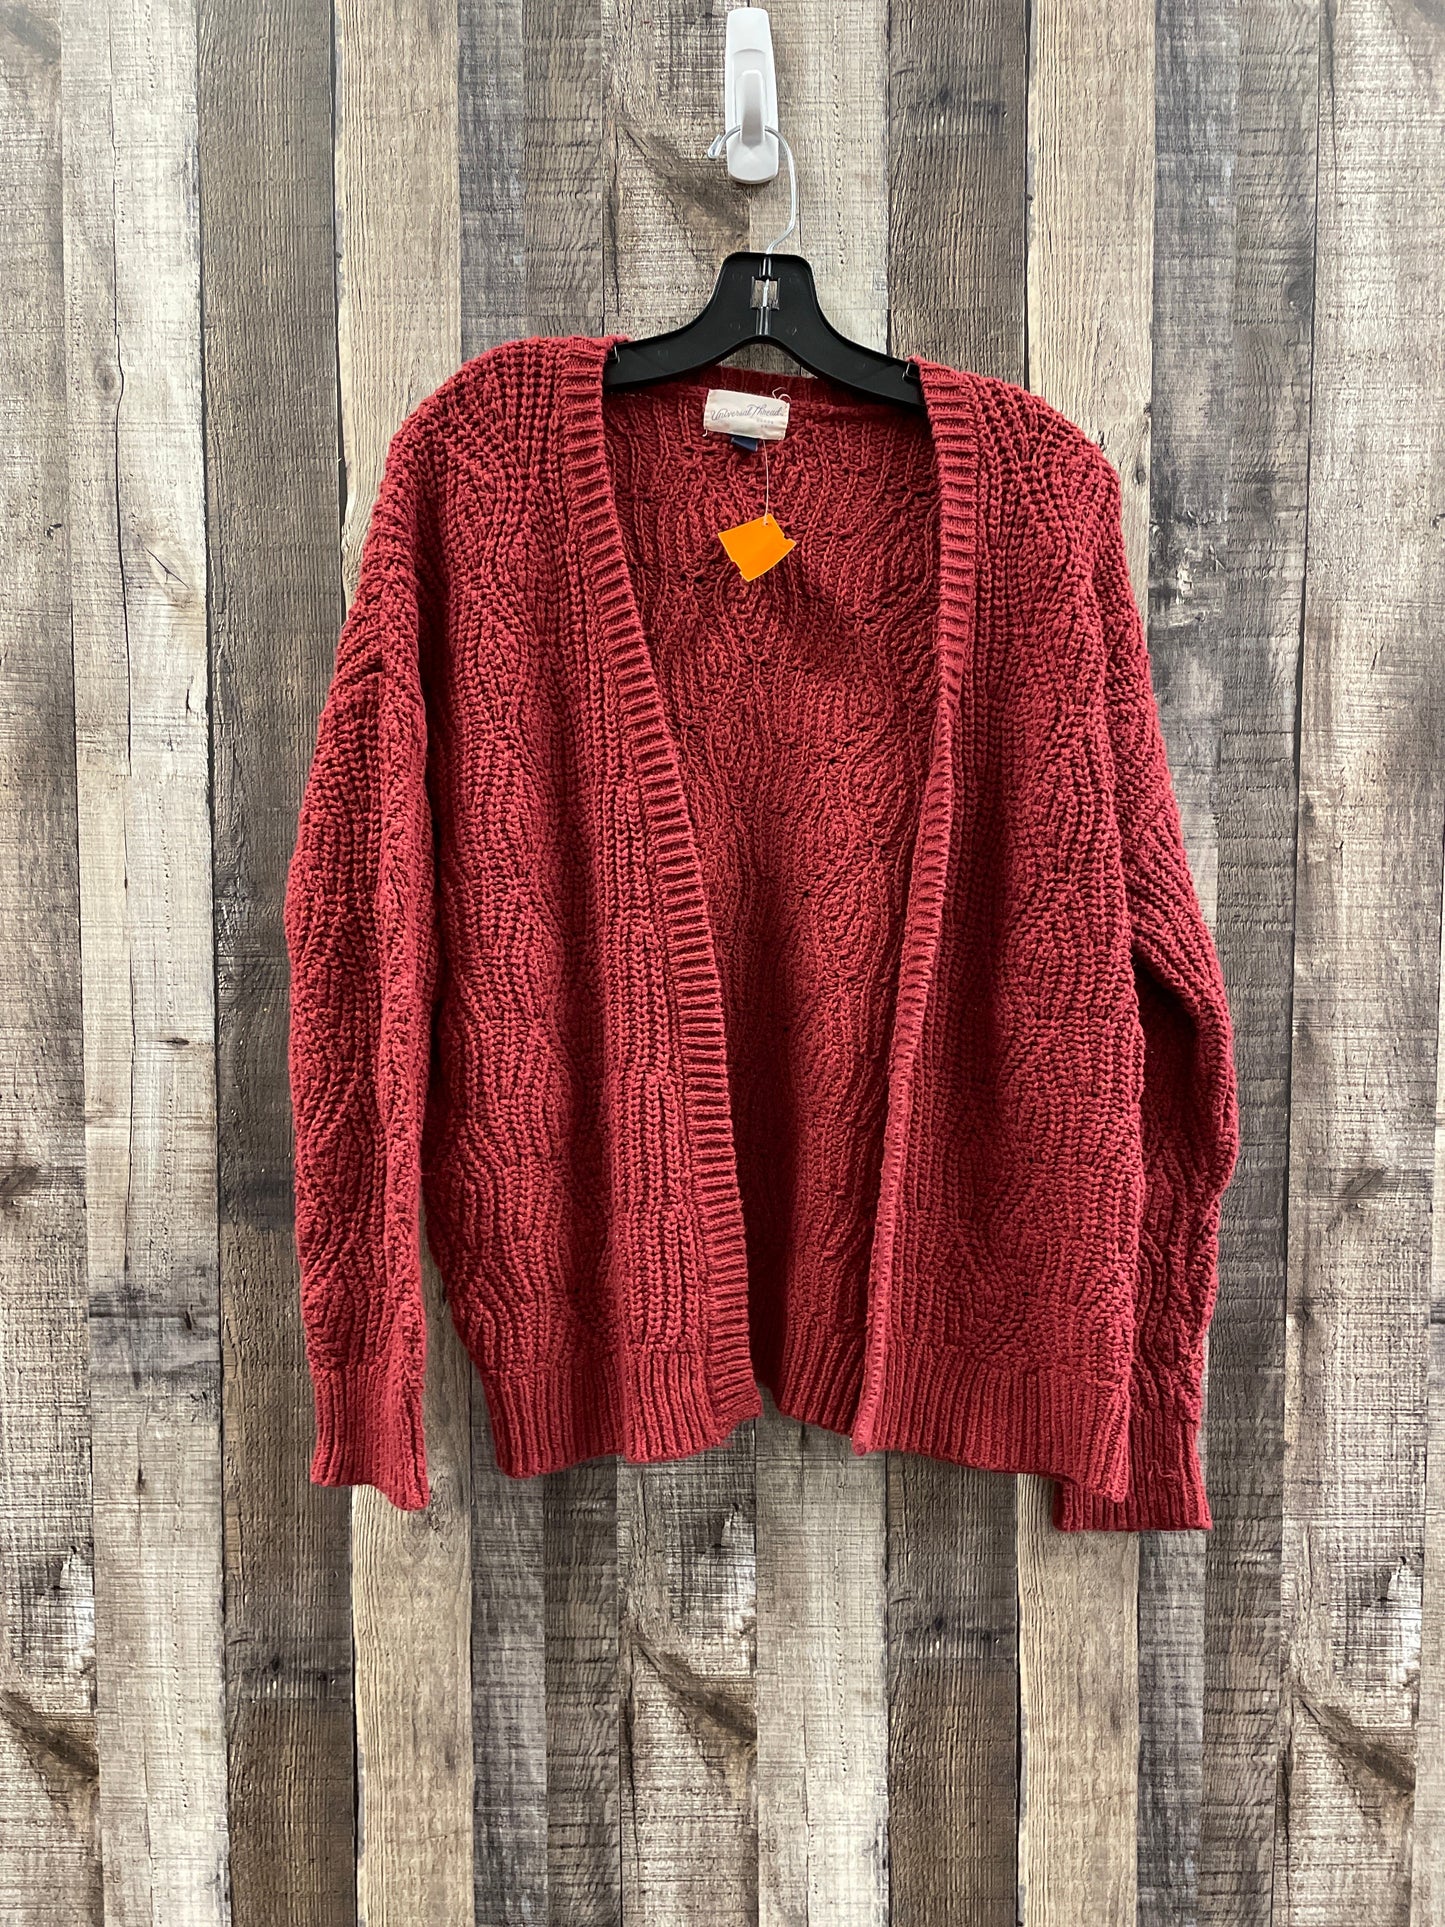 Sweater Cardigan By Universal Thread  Size: L